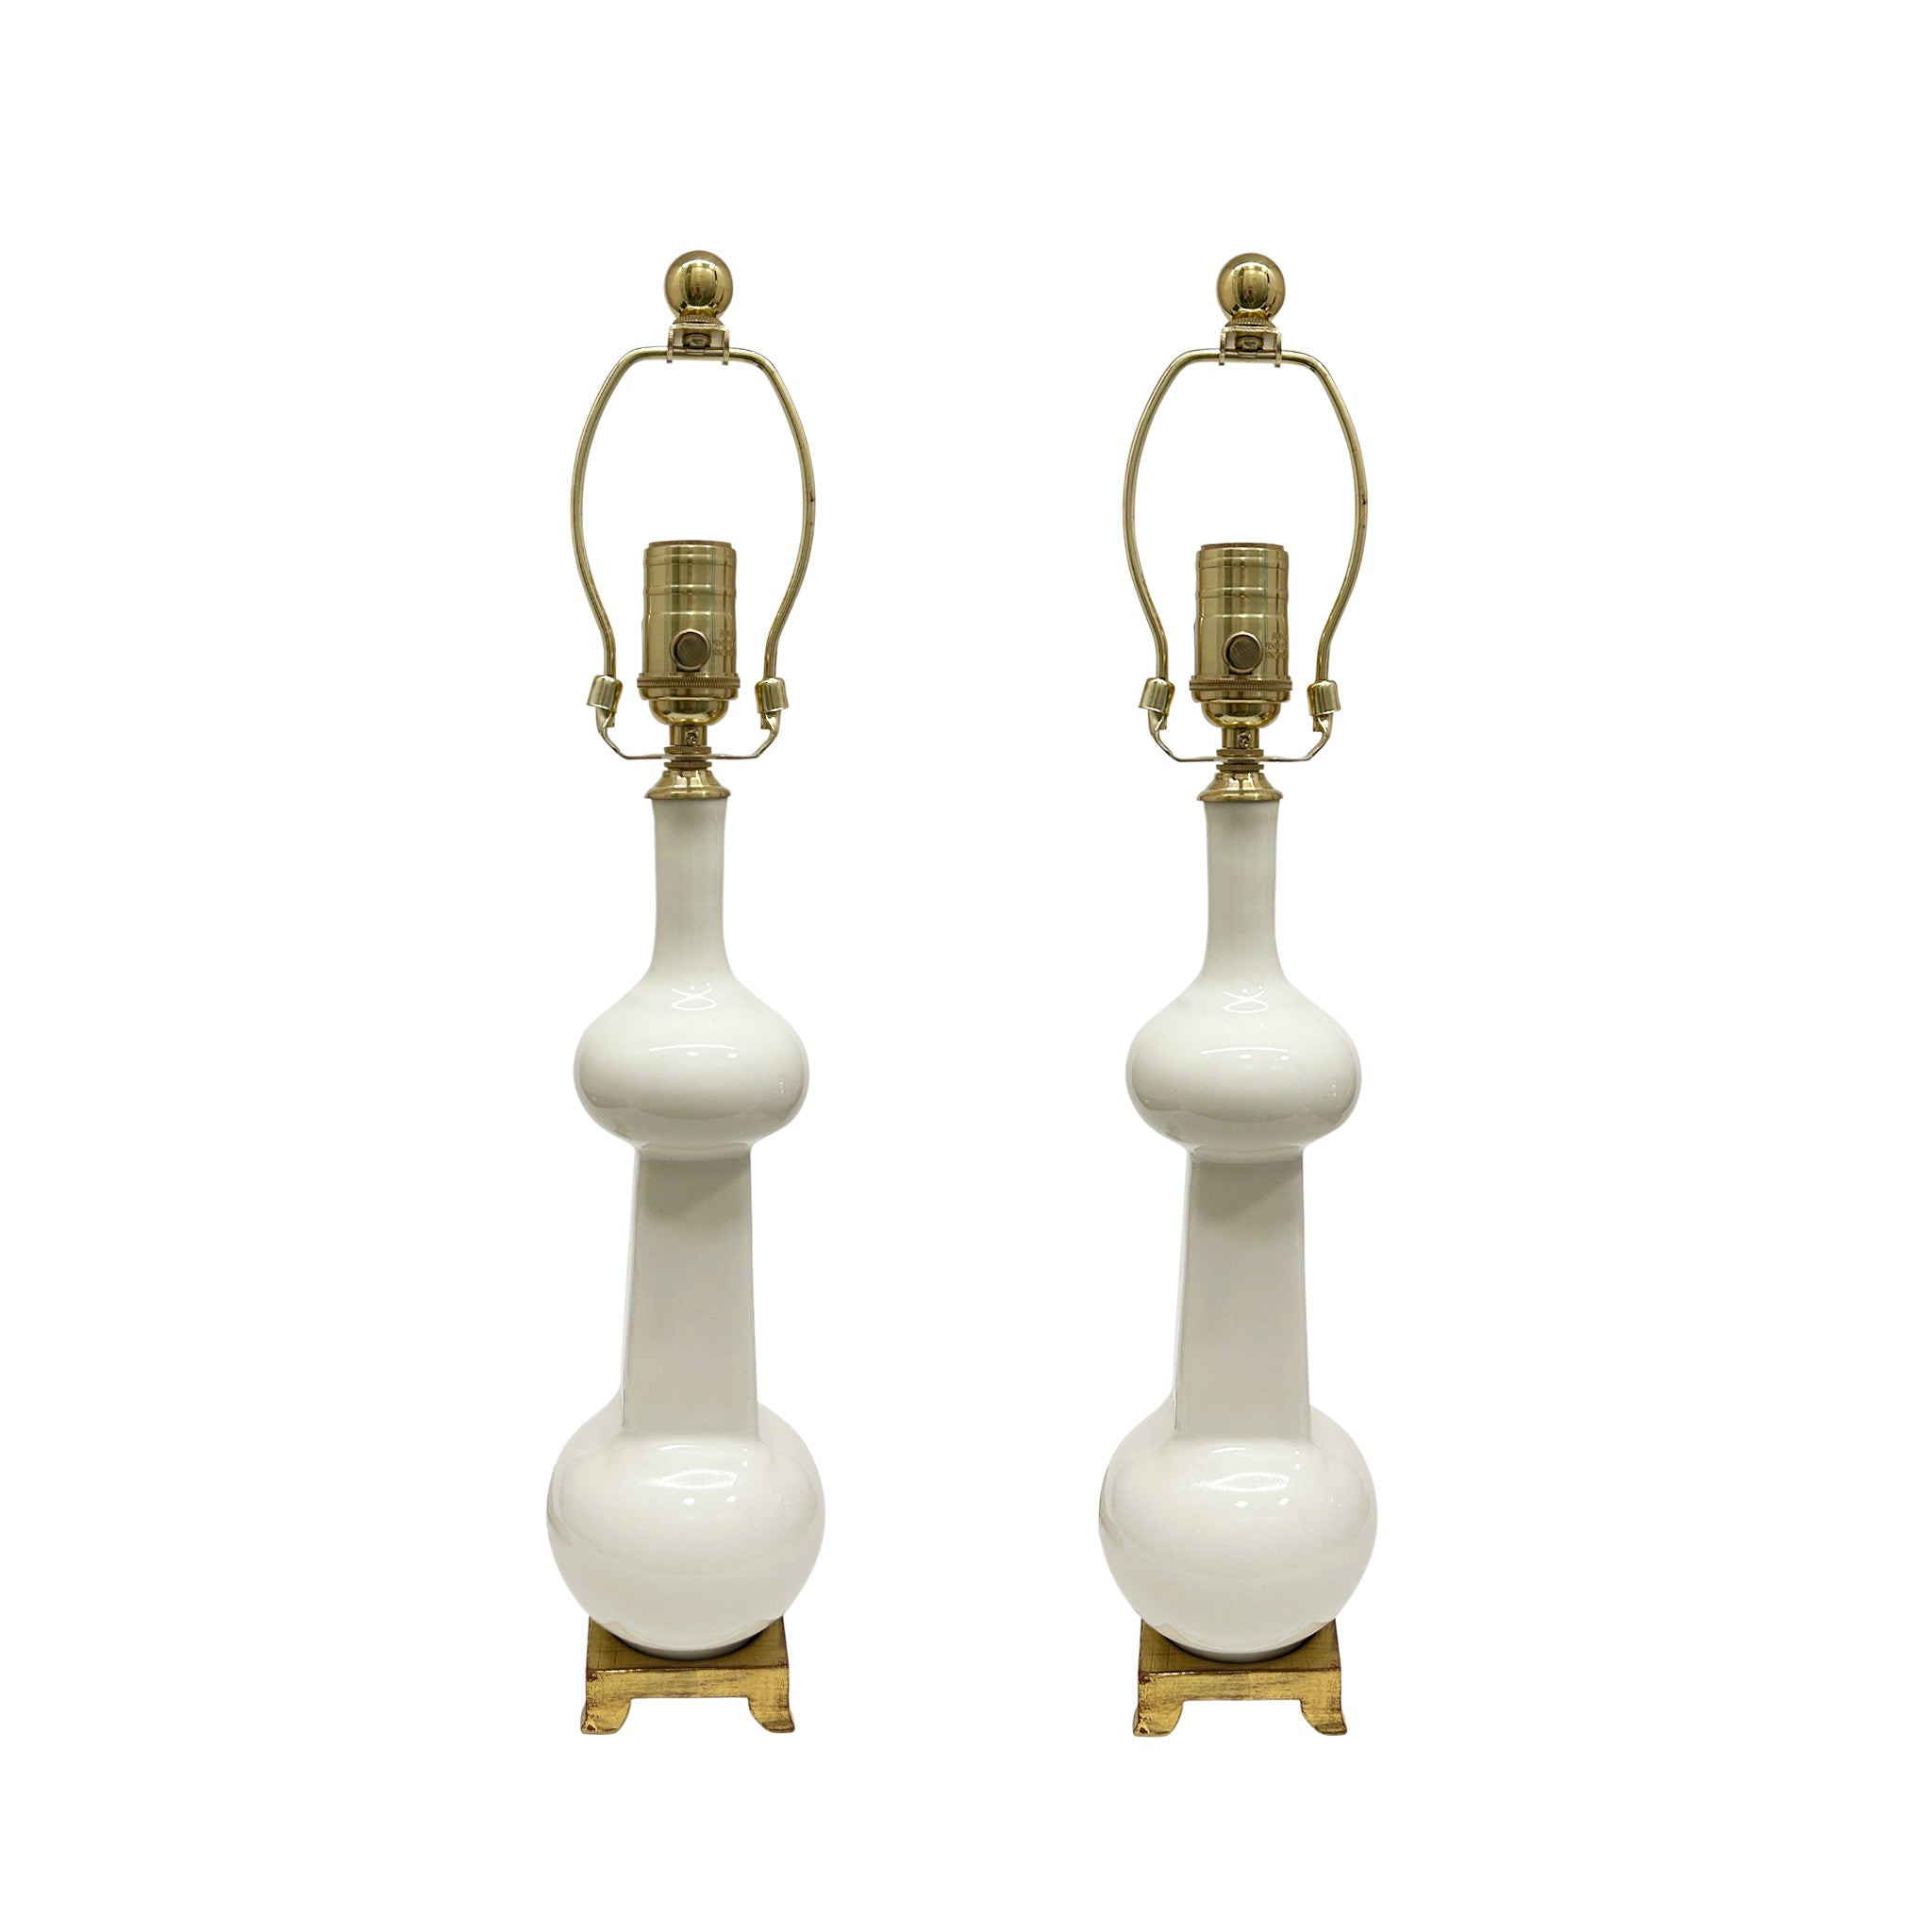 Pair of Small Hadley Lamps in Blanc de Chine